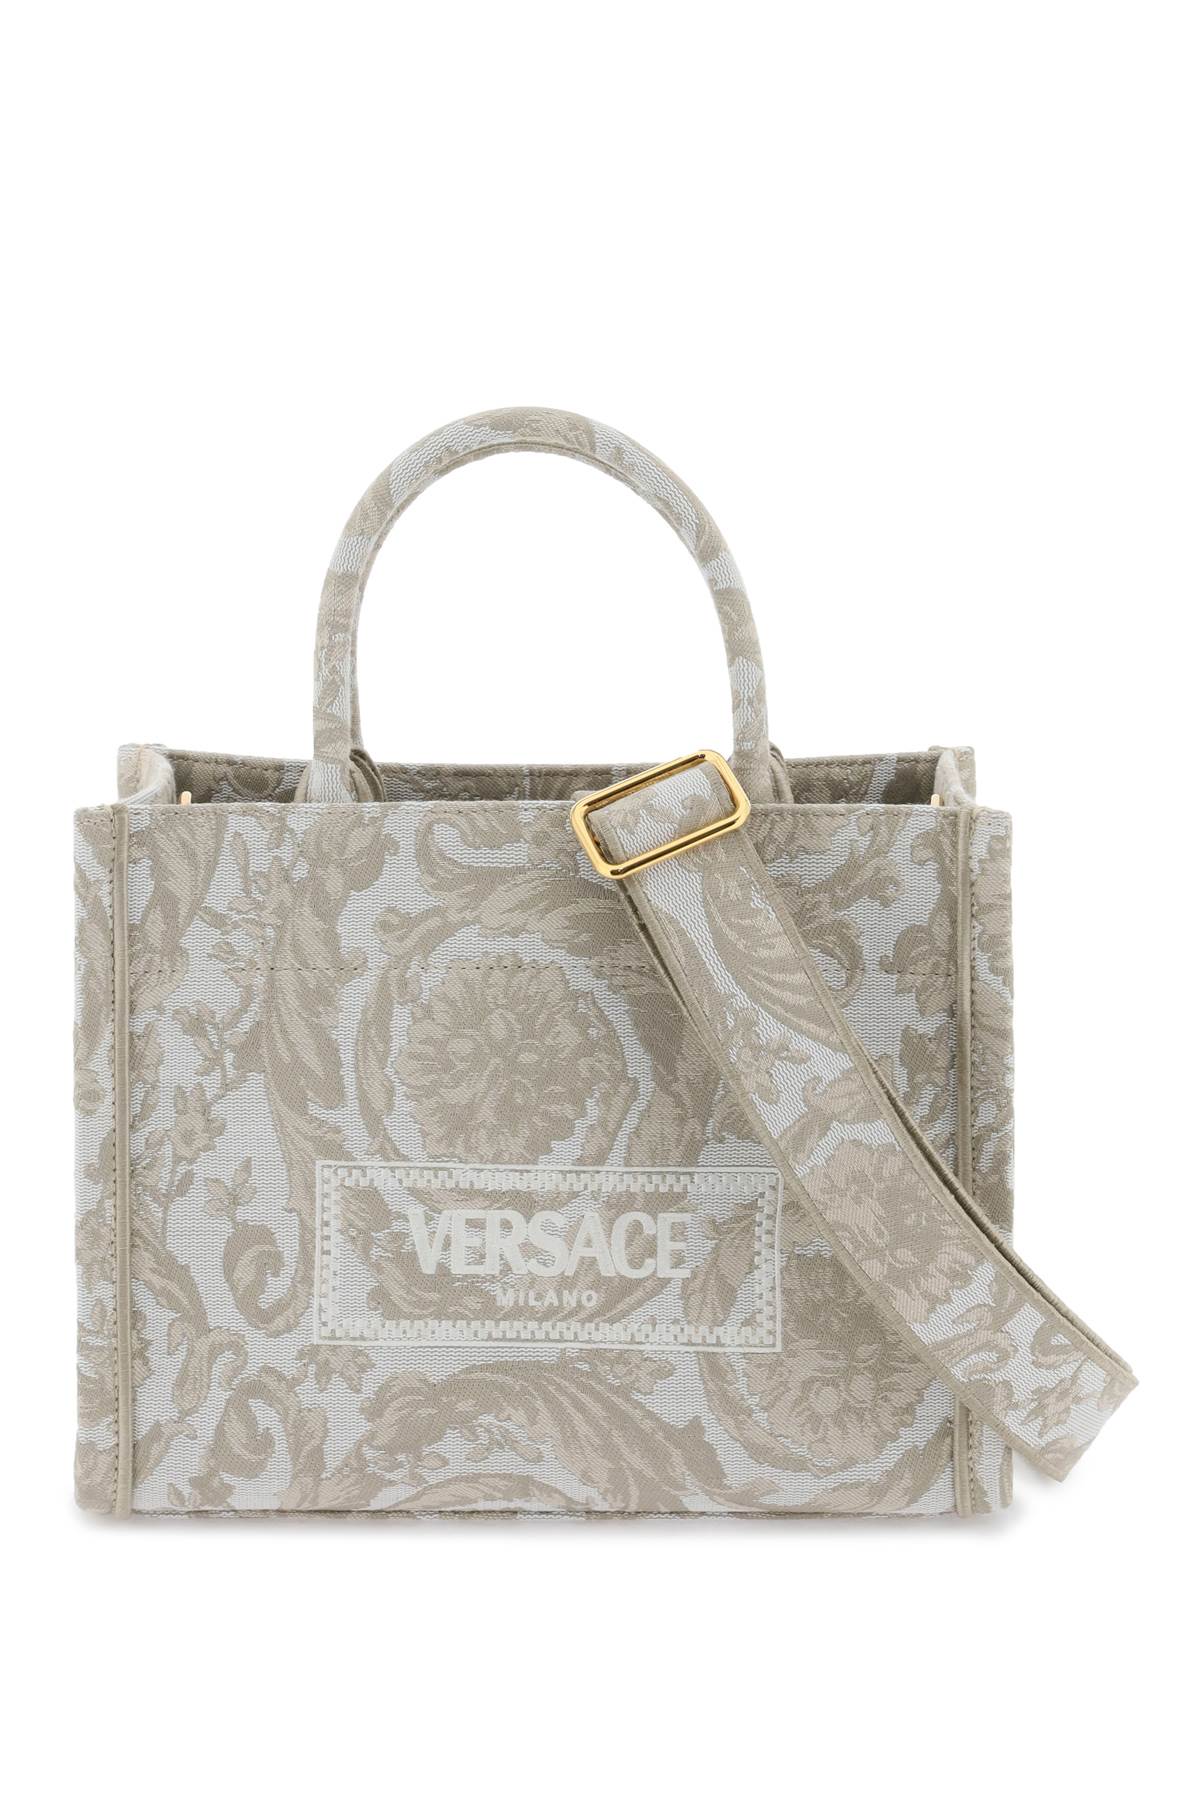 athena barocco small tote bag 1011564 1A09741 BEIGE+BEIGE-VERSACE GOLD